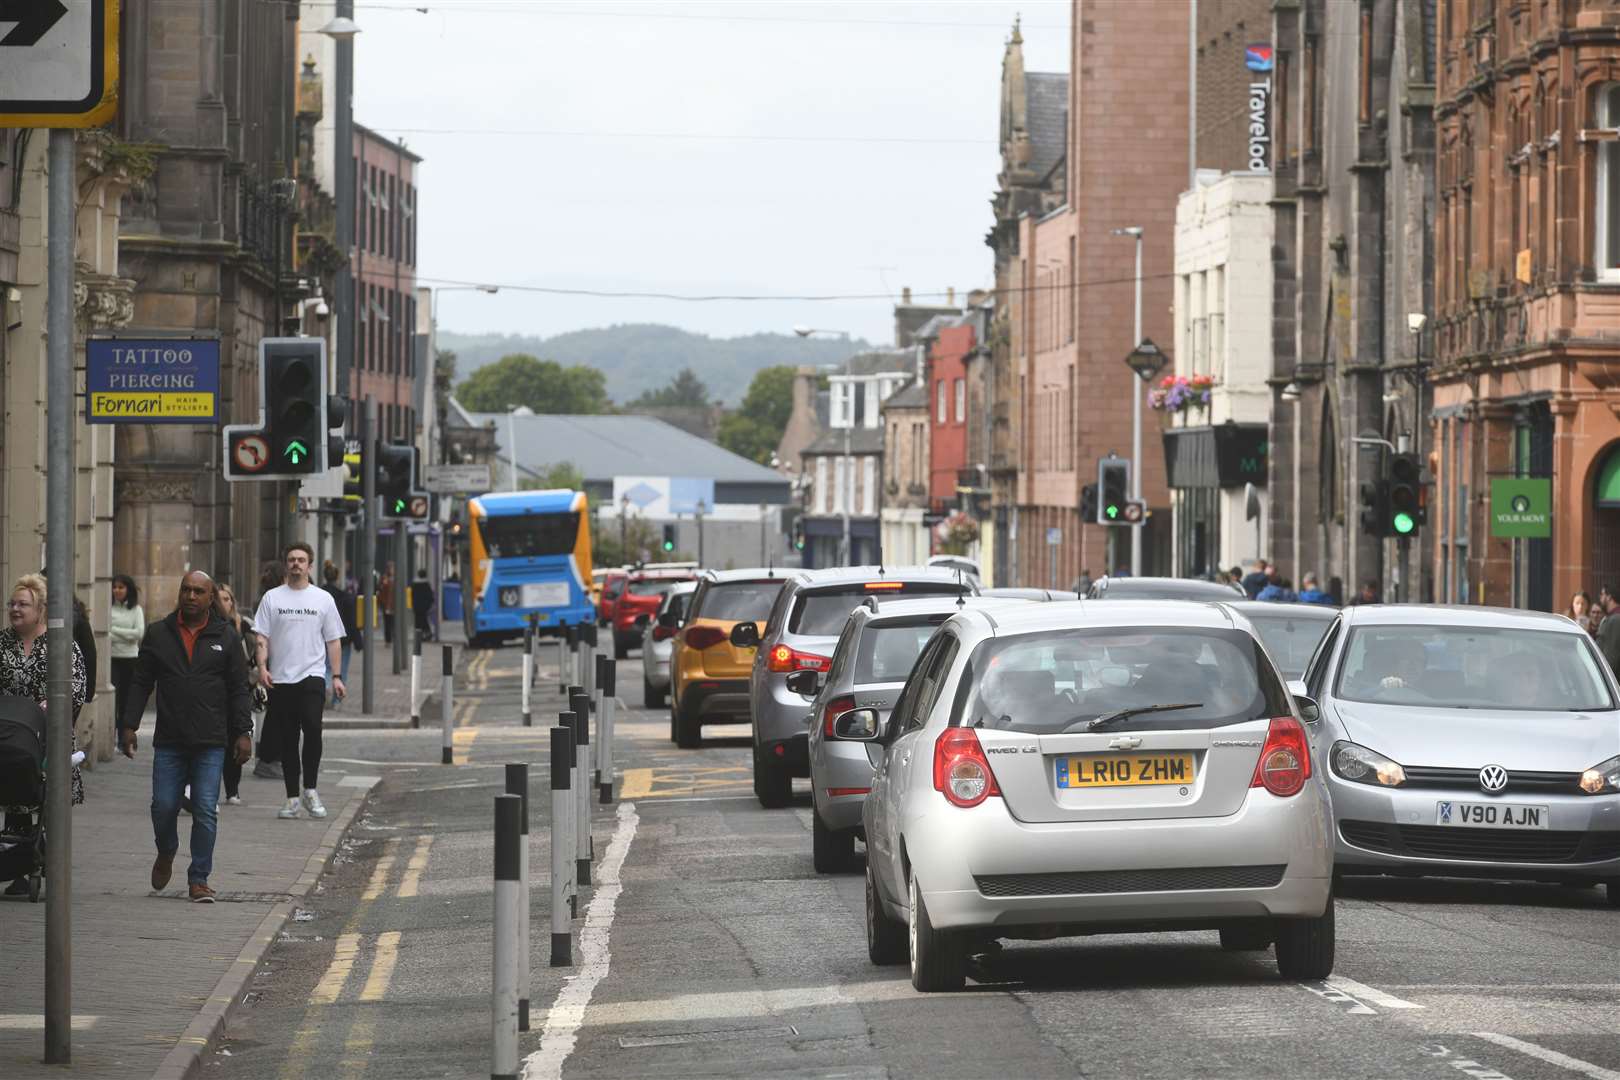 Academy Street is one of the busiest in Inverness city centre.